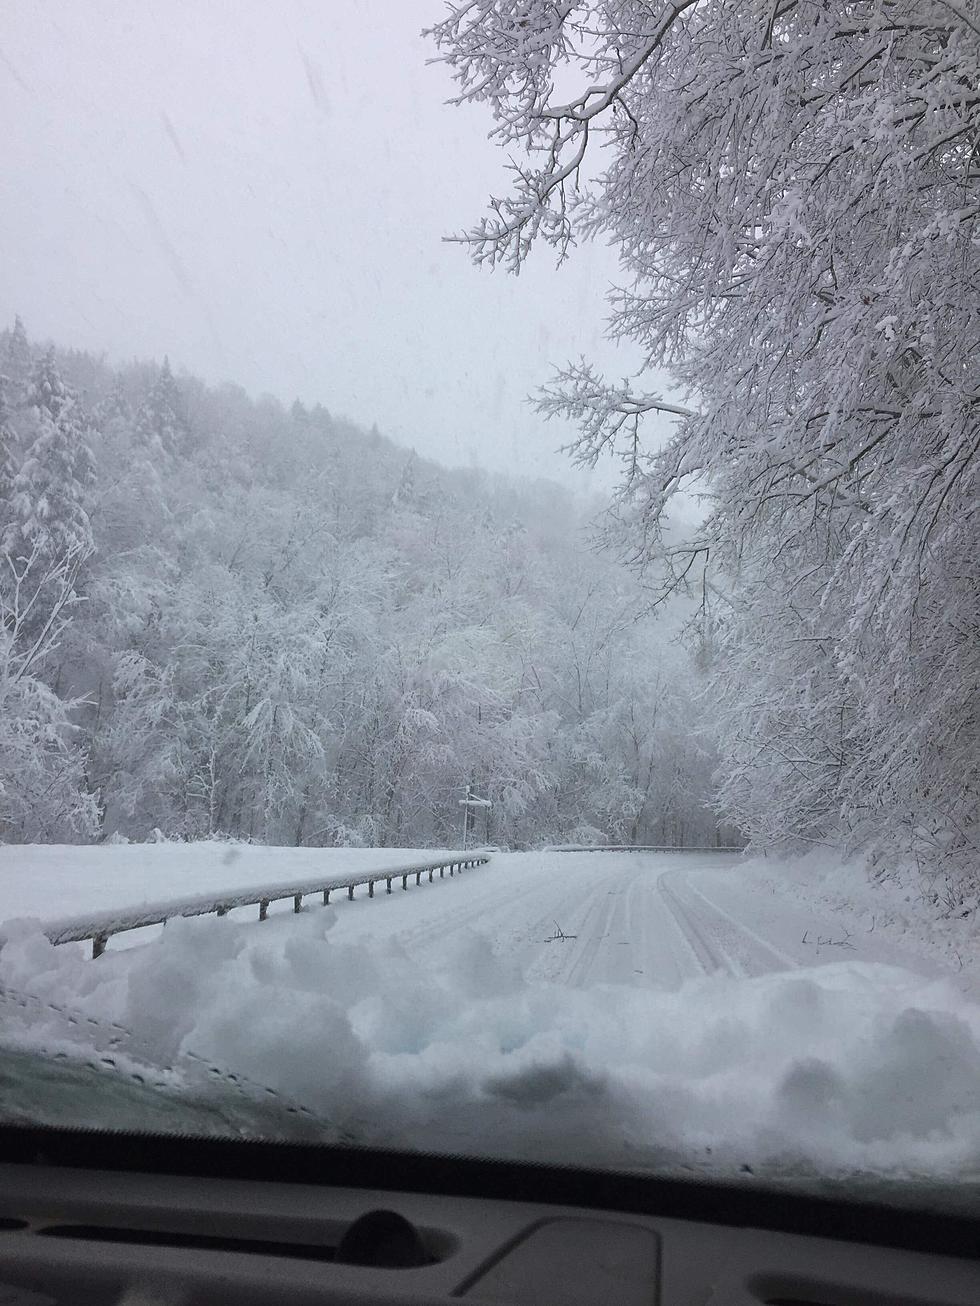 Here's What The Ilion Gorge Looks Like Under All This Snow